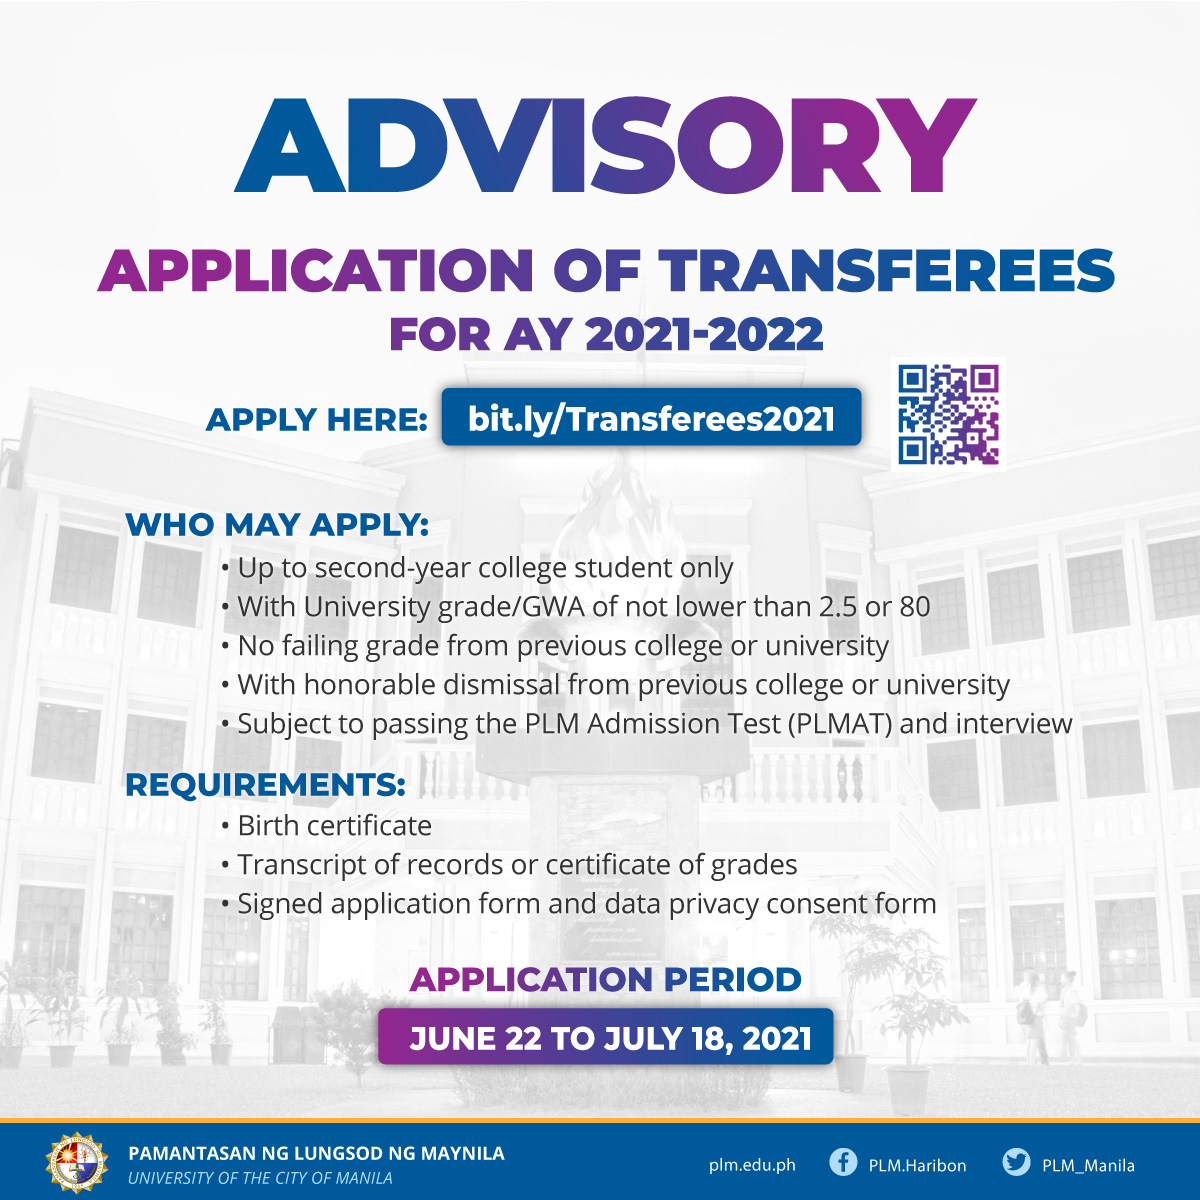 Transferees welcome to apply for AY 2021-2022